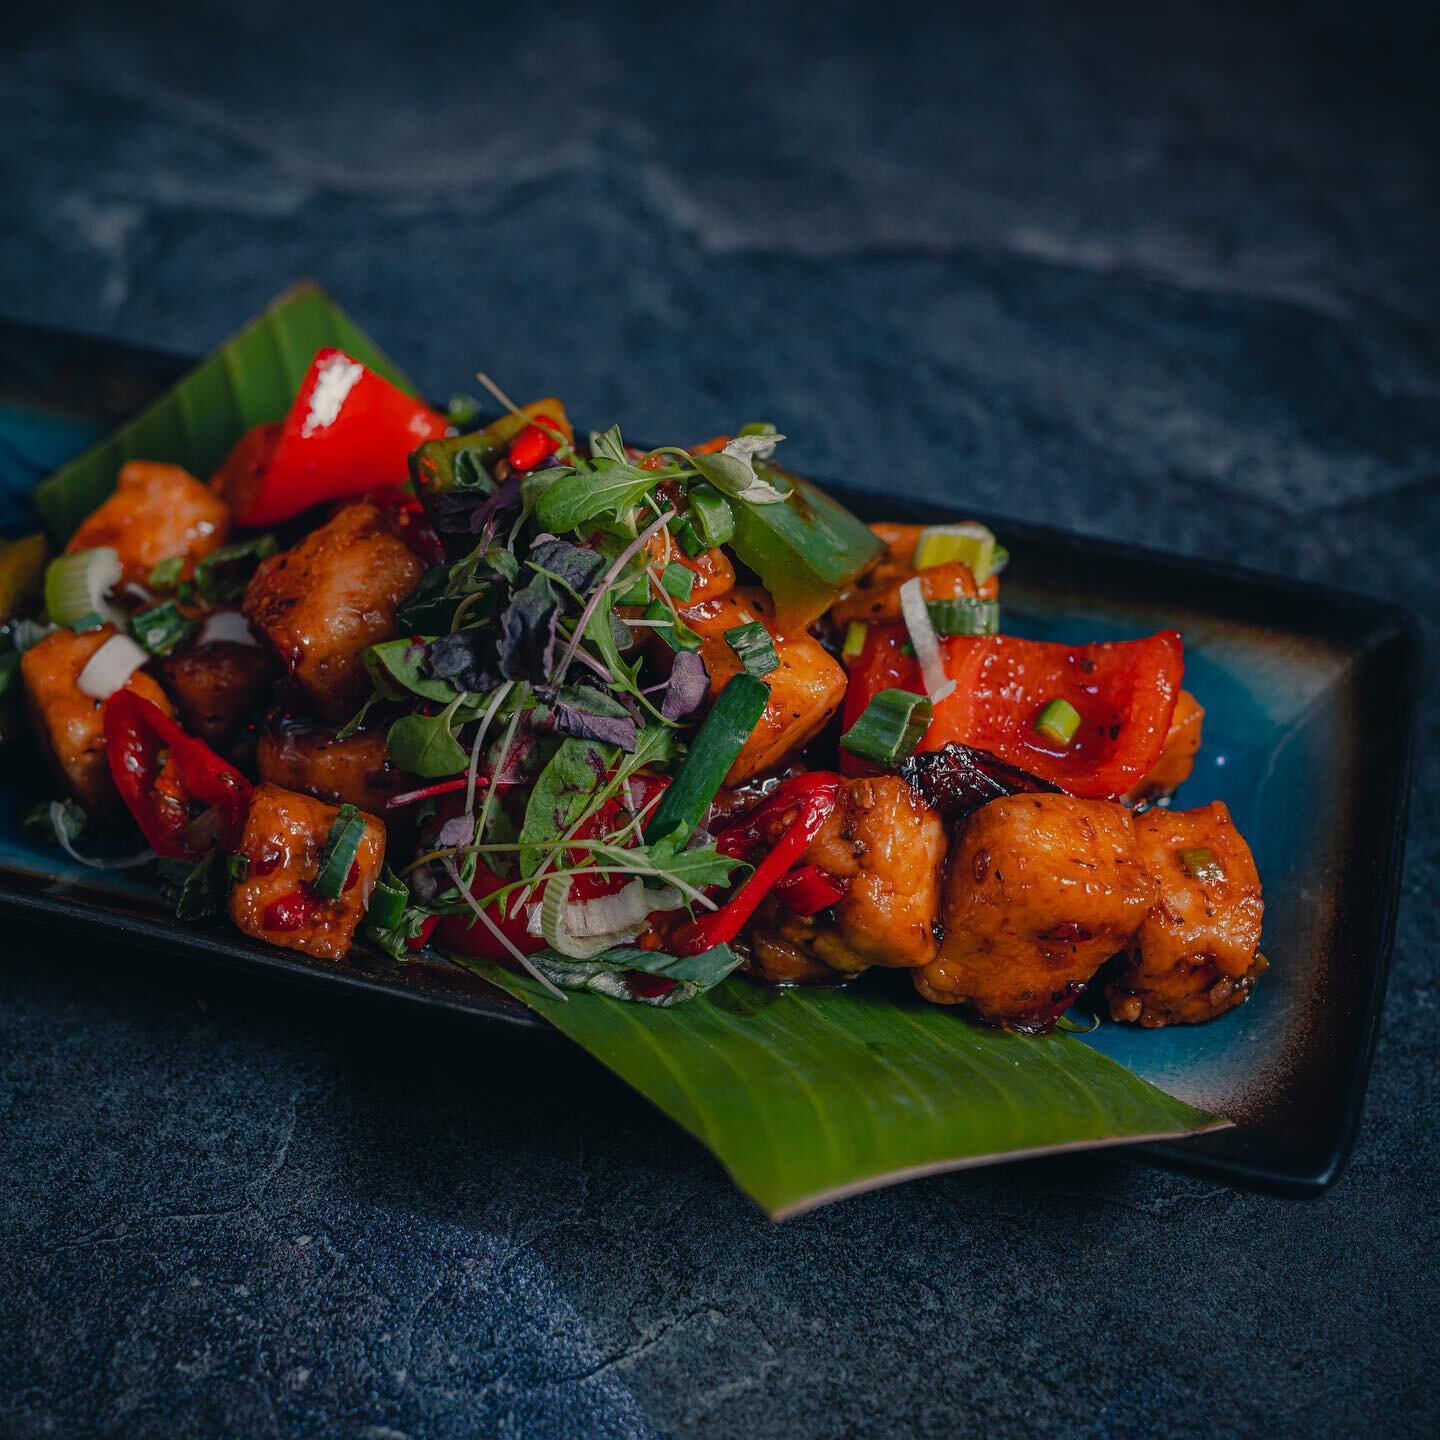 Here at N&Ouml;A, we&rsquo;re bold on flavours. Our Chilli Paneer is back, ready to burst out an explosion of flavours in your mouth - oh how you&rsquo;ve been missed 😍😋 
Brand new on our menu, launches Thursday 3rd March ✨

Book your table at N&Ou